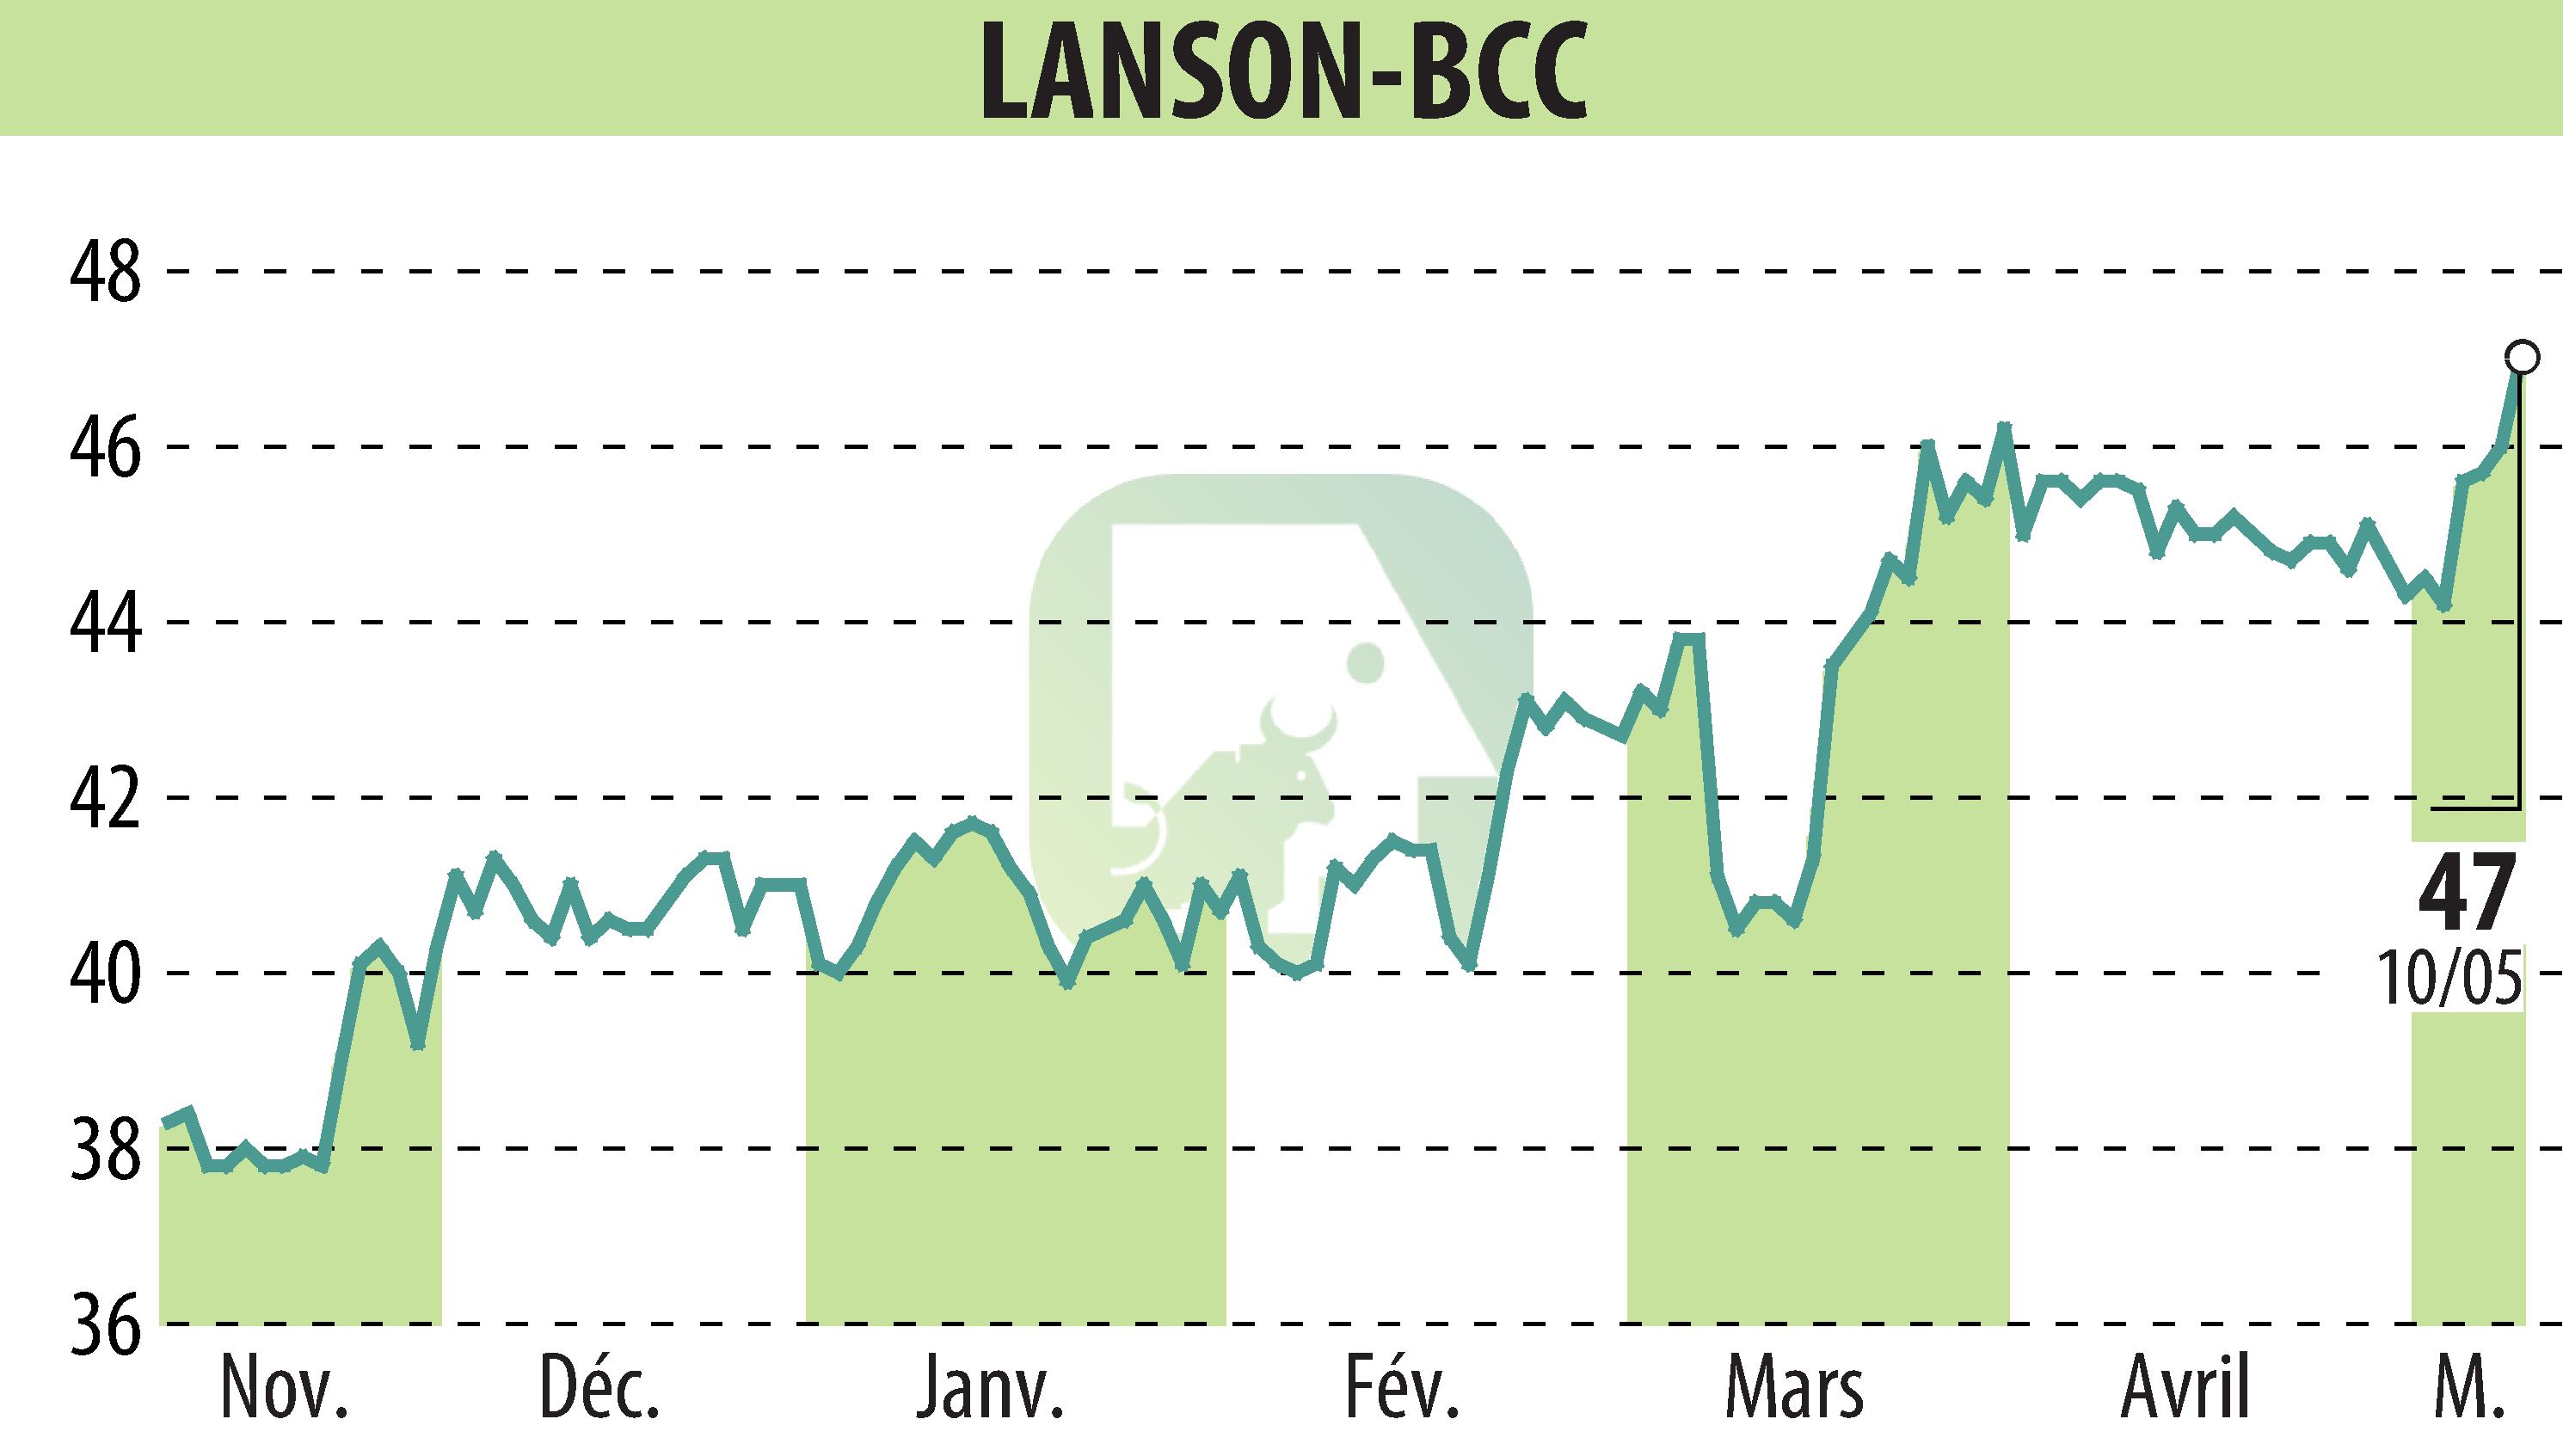 Stock price chart of LANSON-BCC (EPA:ALLAN) showing fluctuations.